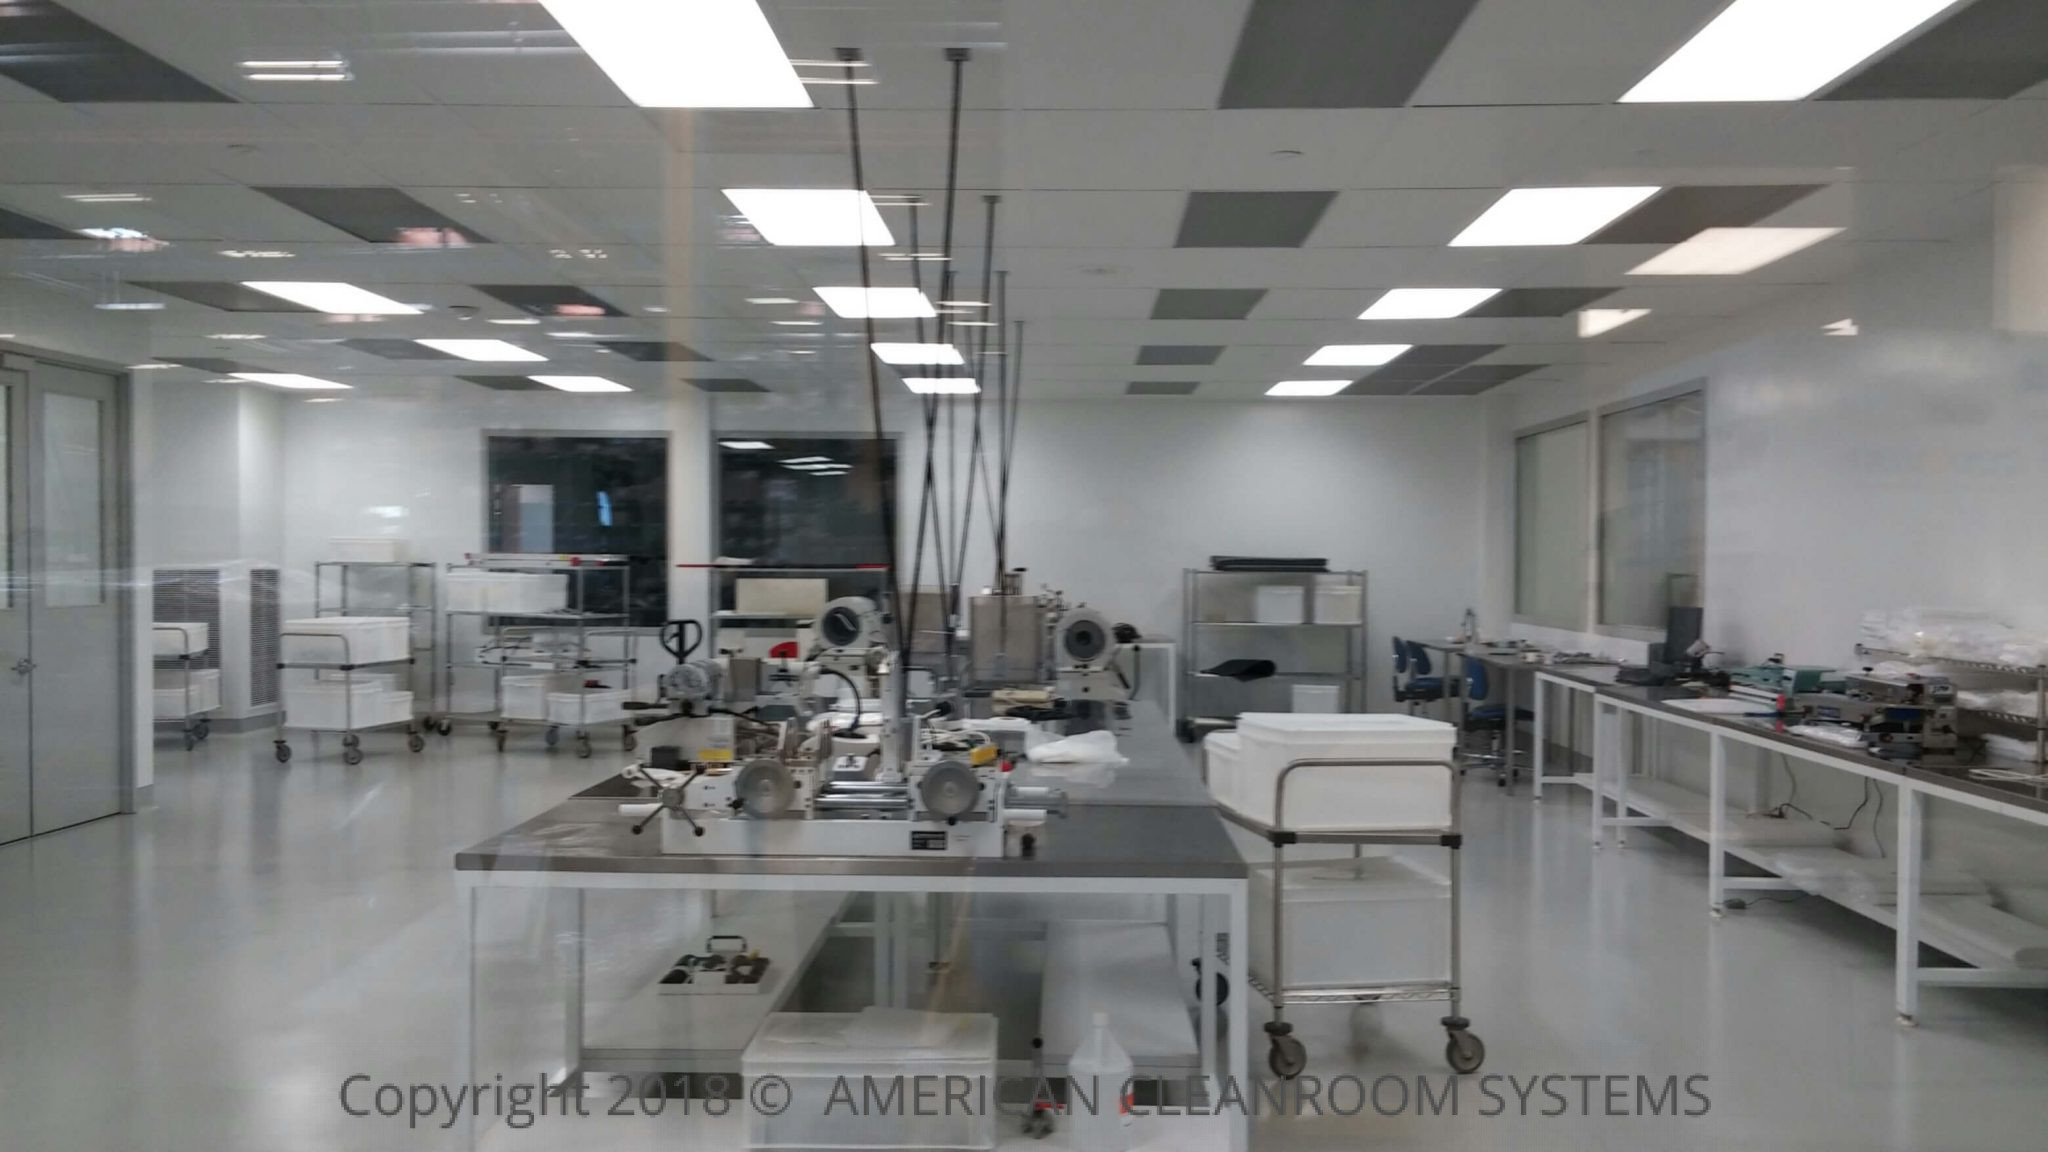 2,937 Square Foot, Class 10,000, ISO7 Manufacturing Cleanroom